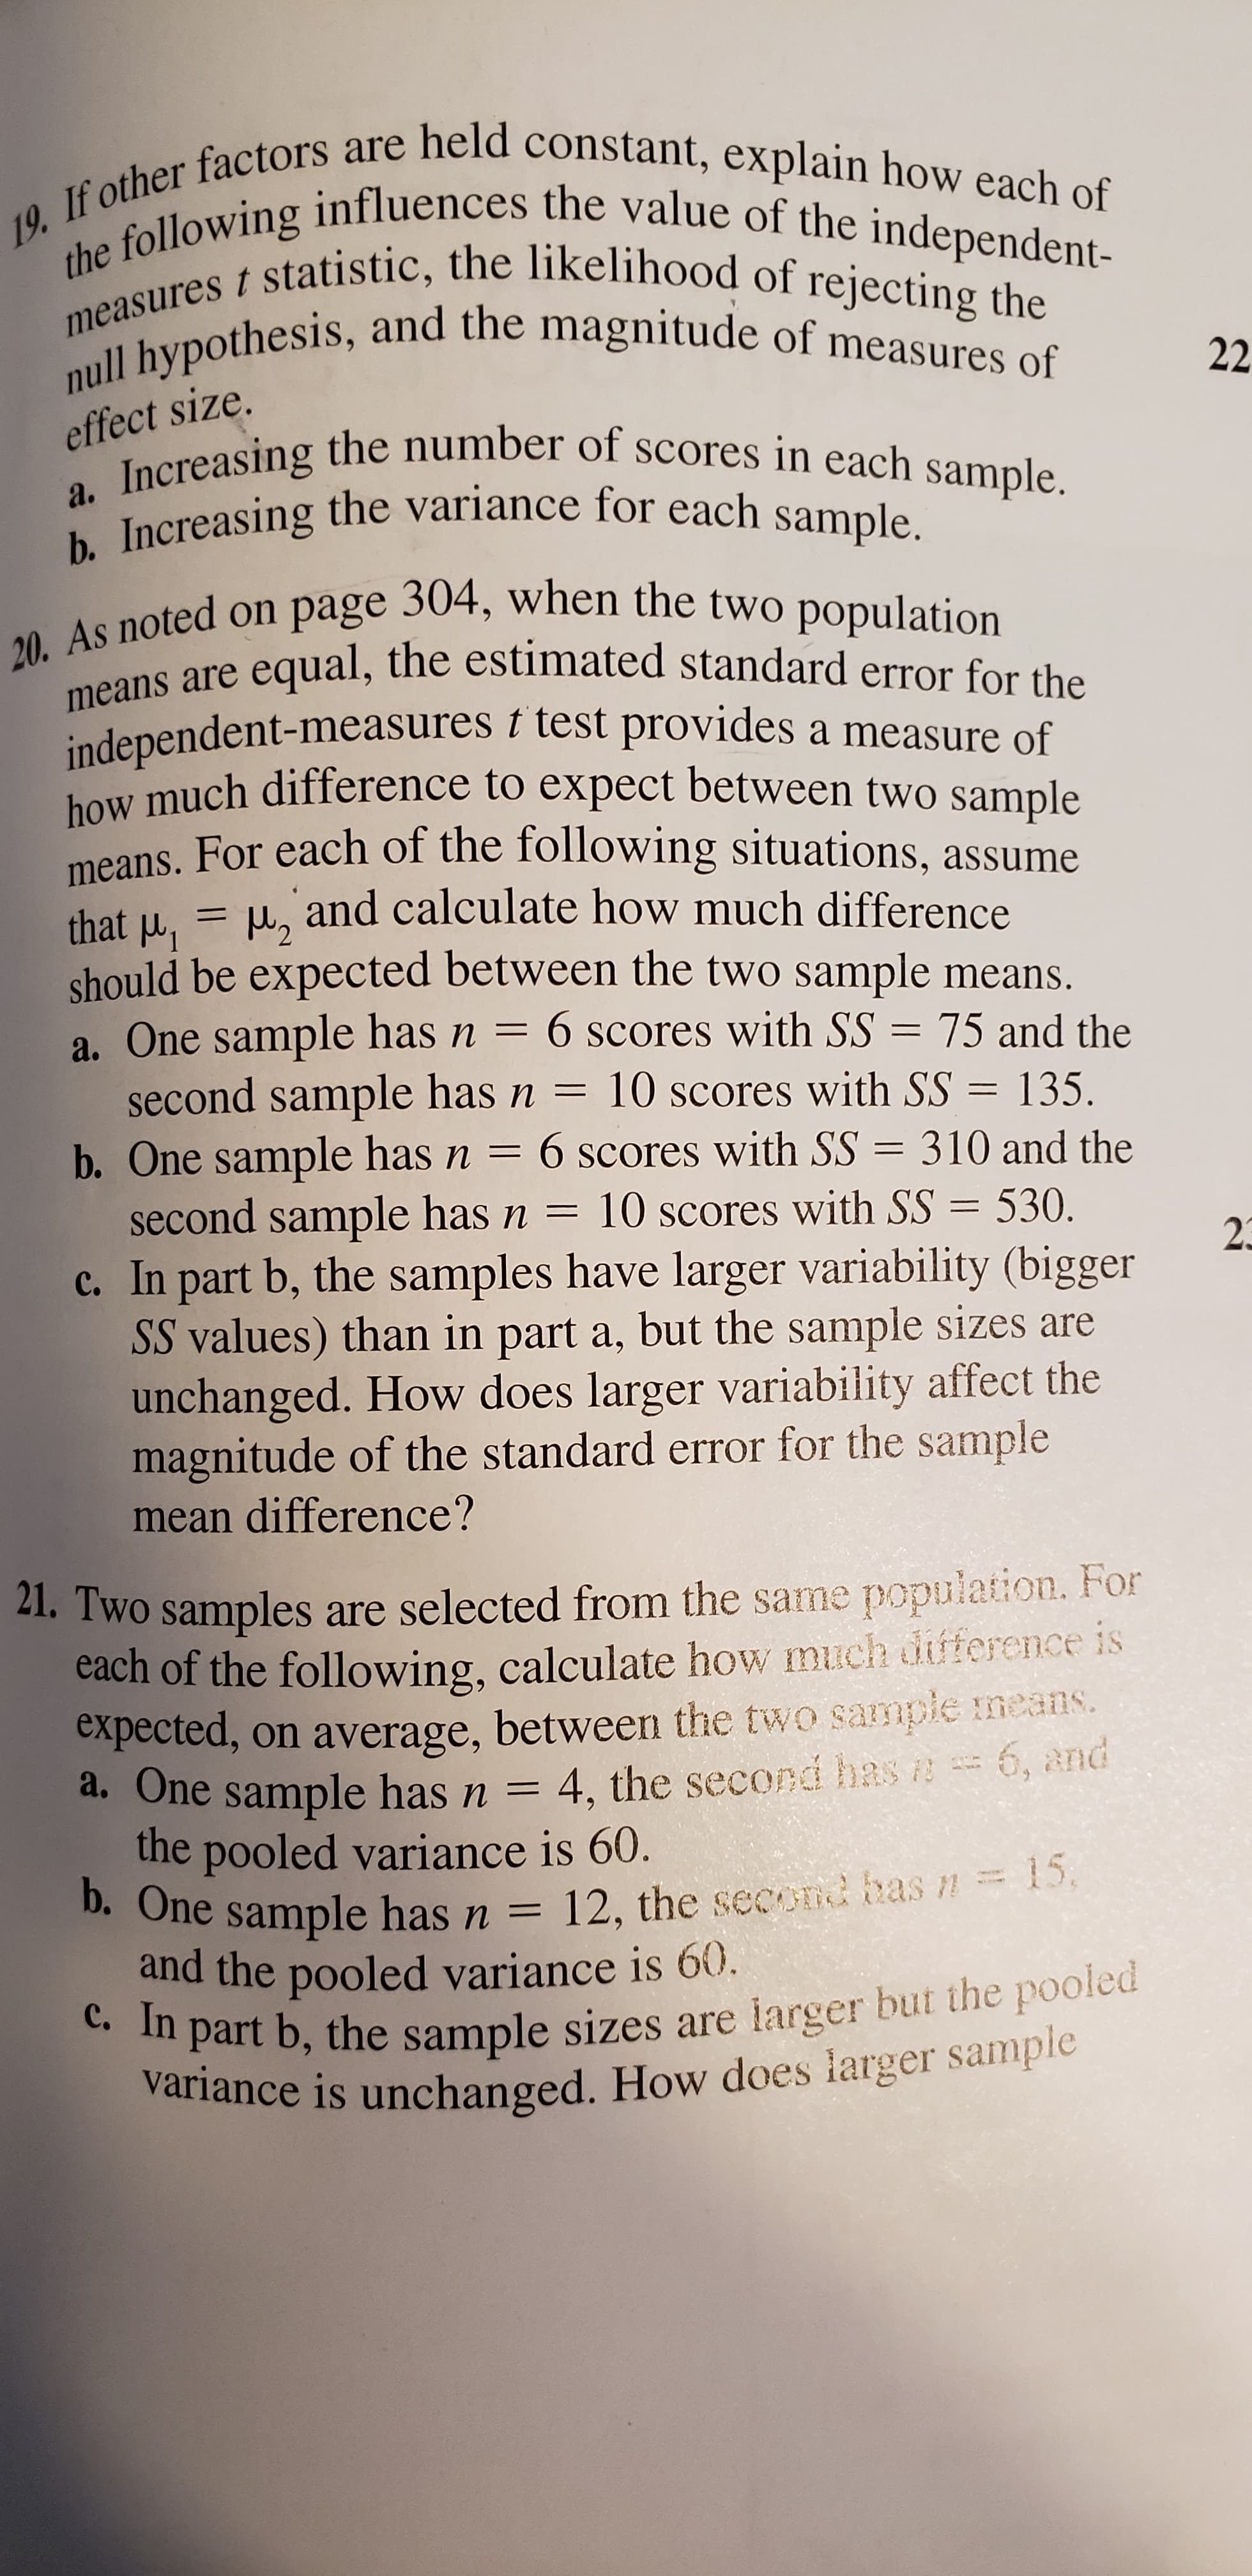 19. If other factors are held constant, explain how each of
the following influences the value of the independent-
measures t statistic, the likelihood of rejecting the
null hypothesis, and the magnitude of measures of
22
effect size.
a. Increasing the number of scores in each sample.
b. Increasing the variance for each sample.
As noted on page 304, when the two population
means are equal, the estimated standard error for the
independent-measures t test provides a measure of
how much difference to expect between two sample
means, For each of the following situations, assume
u, and calculate how much difference
that u, = Hz
should be expected between the two sample means.
a. One sample has n = 6 scores with SS = 75 and the
second sample has n = 10 scores with SS
b. One sample has n =
second sample has n = 10 scores with SS = 530.
c. In part b, the samples have larger variability (bigger
SS values) than in part a, but the sample sizes are
unchanged. How does larger variability affect the
magnitude of the standard error for the sample
%3D
135.
6 scores with SS = 310 and the
23
mean difference?
21. Two samples are selected from the same population. For
cach of the following, calculate how much duference is
expected, on average, between the two sample means.
a. One sample has n
the pooled variance is 60.
D. One sample has n = 12, the second has n=D.
and the pooled variance is 60.
c. In part b, the sample sizes are larger but the pooled
variance is unchanged. How does larger sample
4, the second has e 6, and
